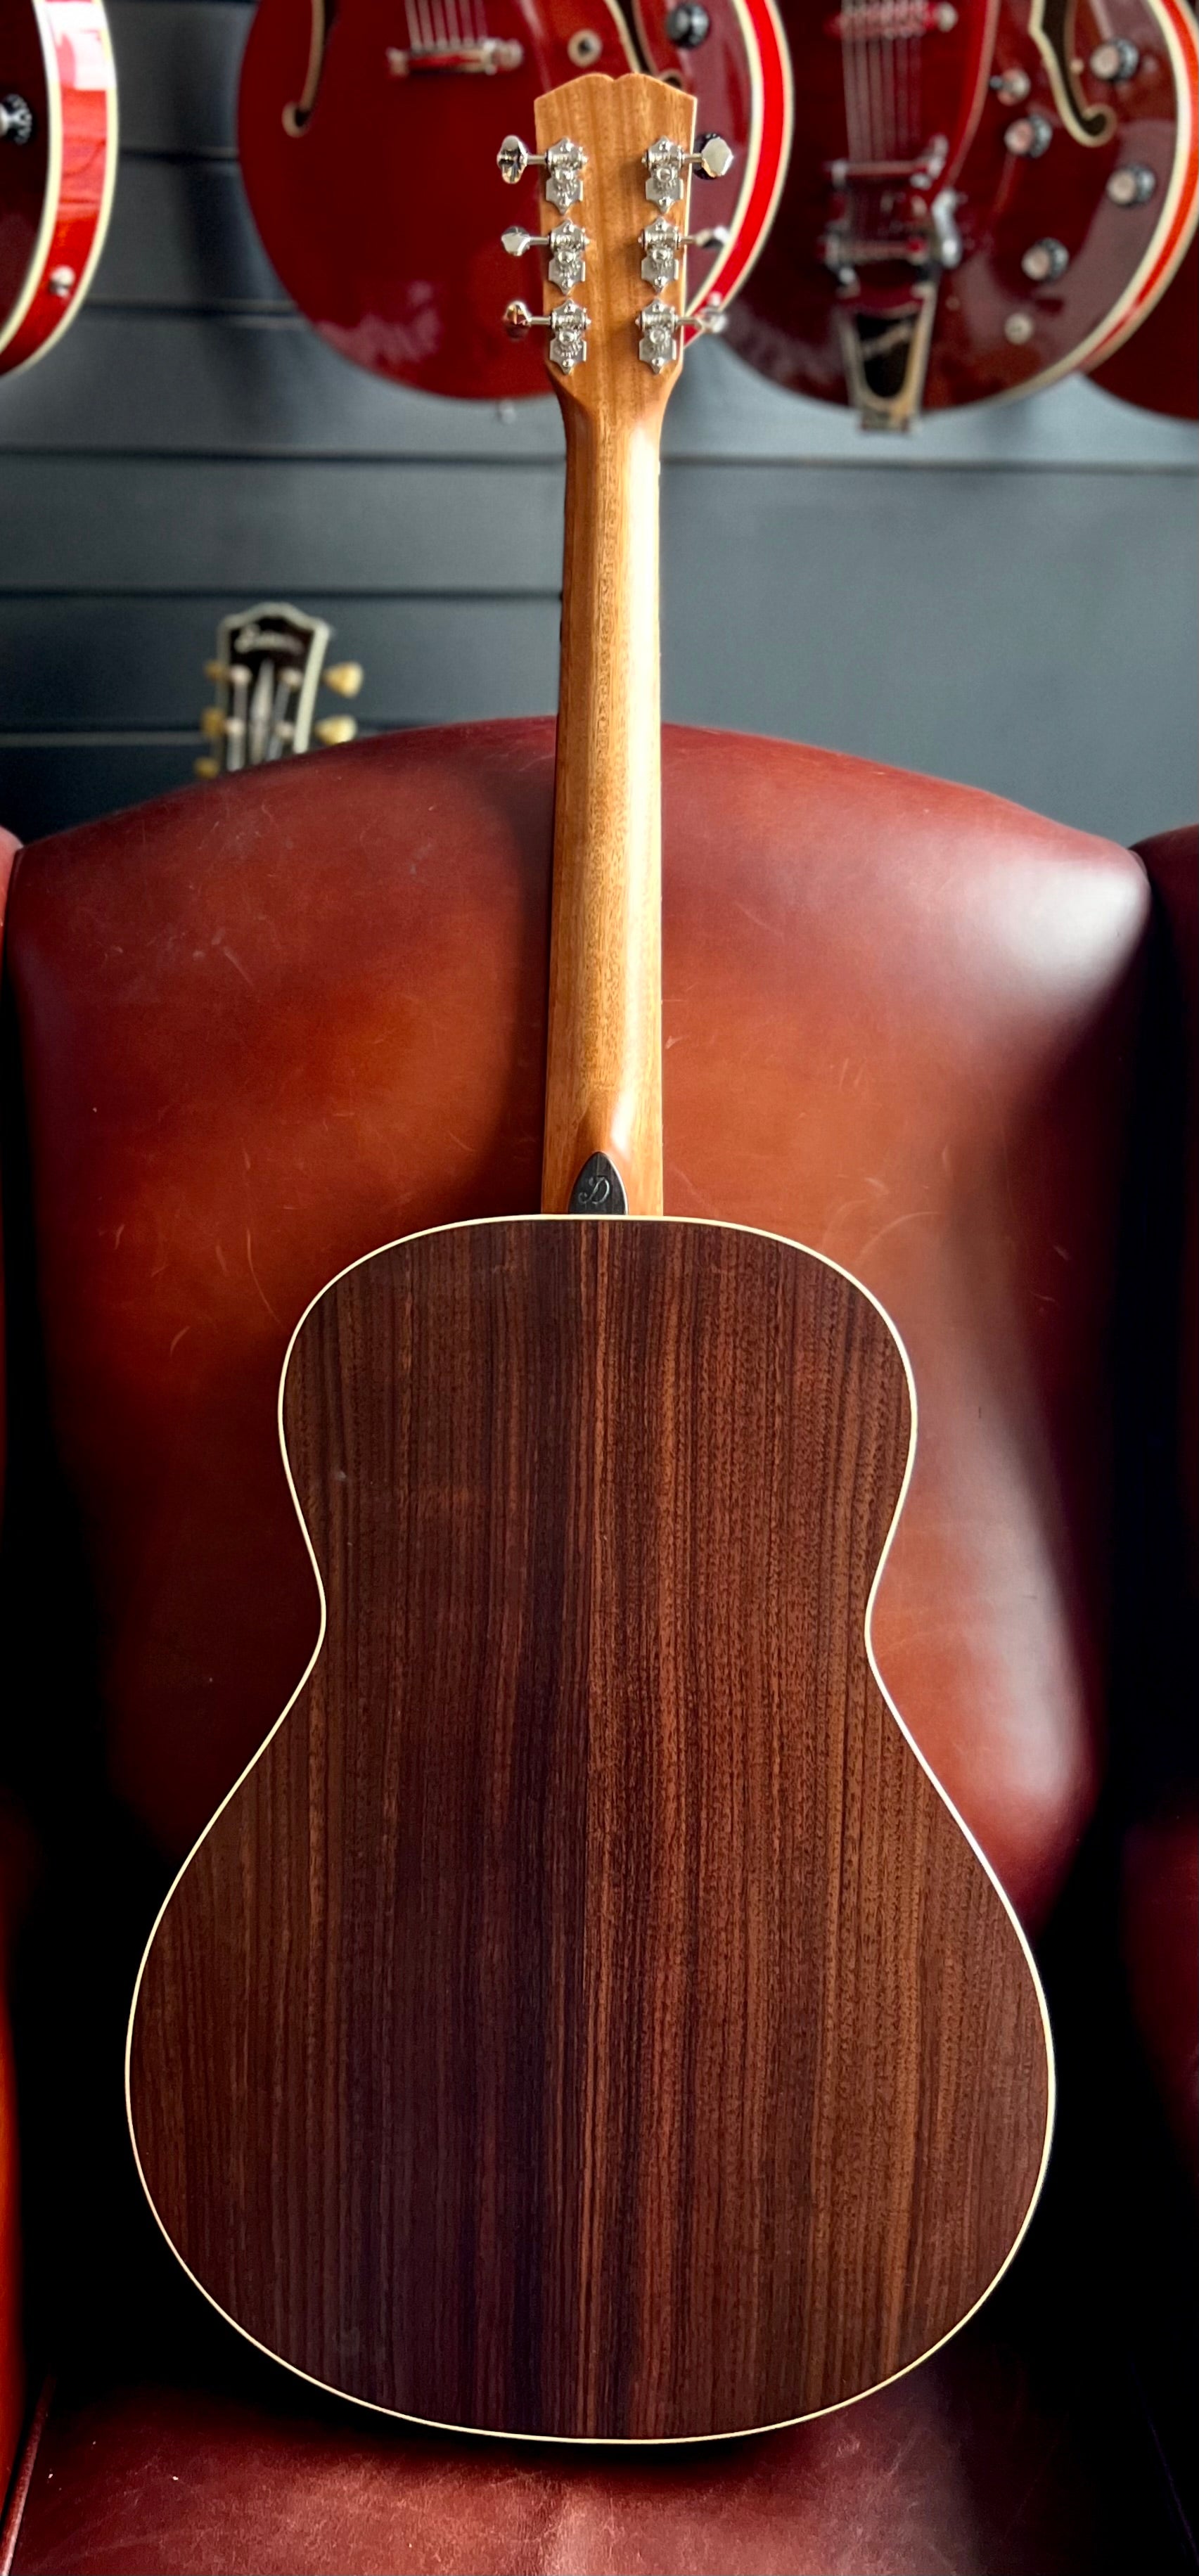 Dowina Rosewood OMG-SWS Deluxe OM Body Acoustic Guitar, Acoustic Guitar for sale at Richards Guitars.